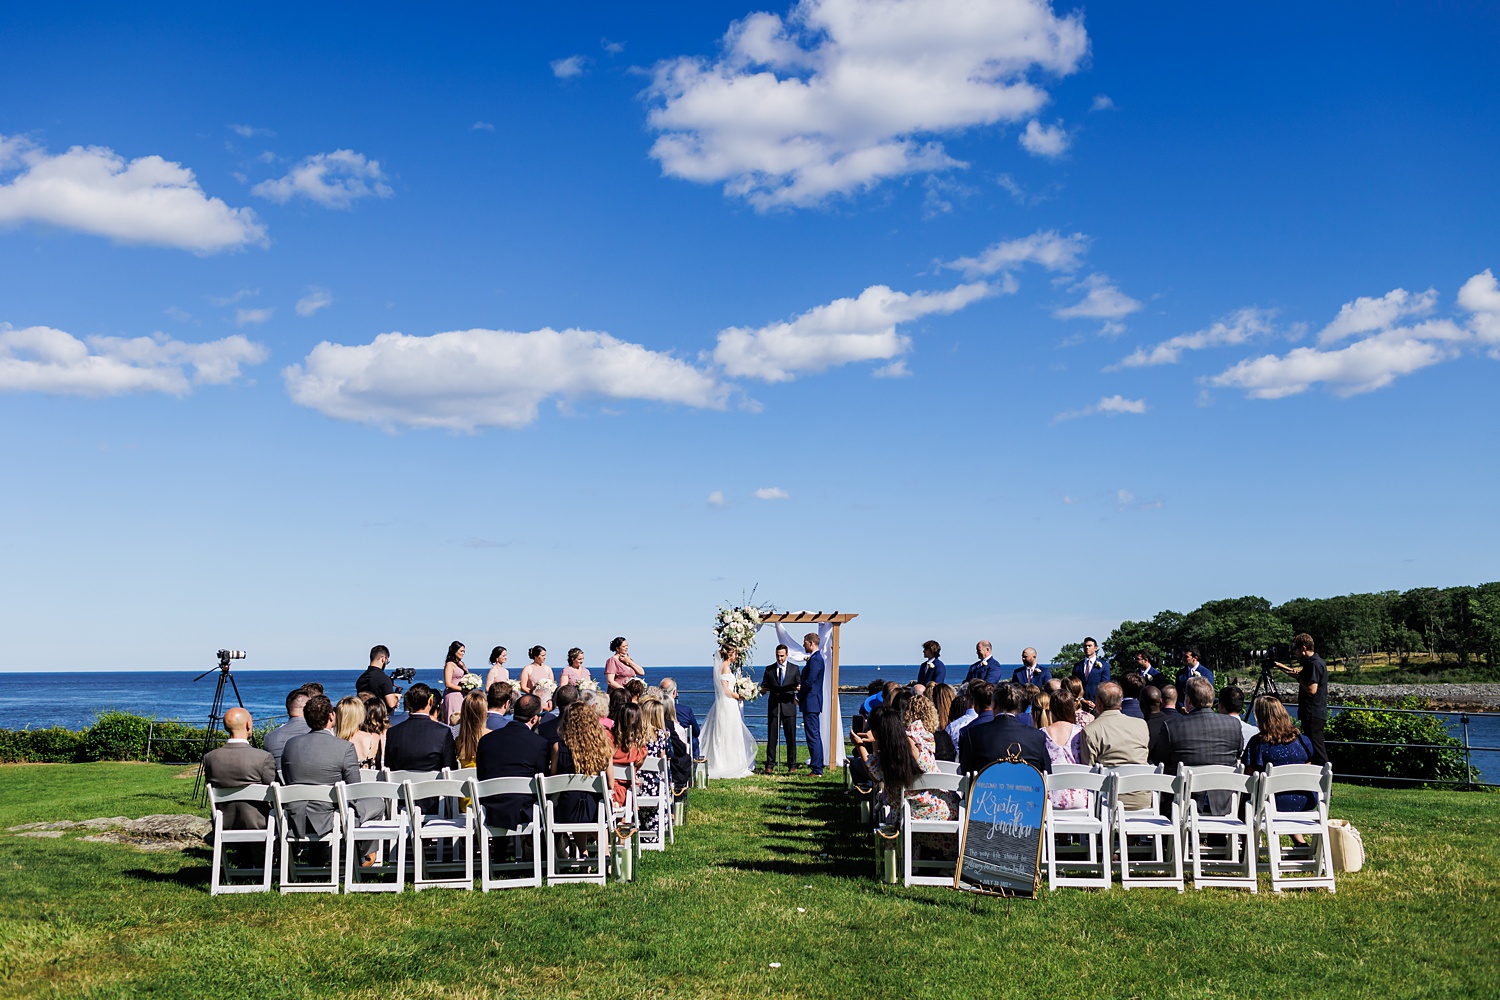 The wedding on the lawn of Stageneck Inn in York Maine on a sunny day